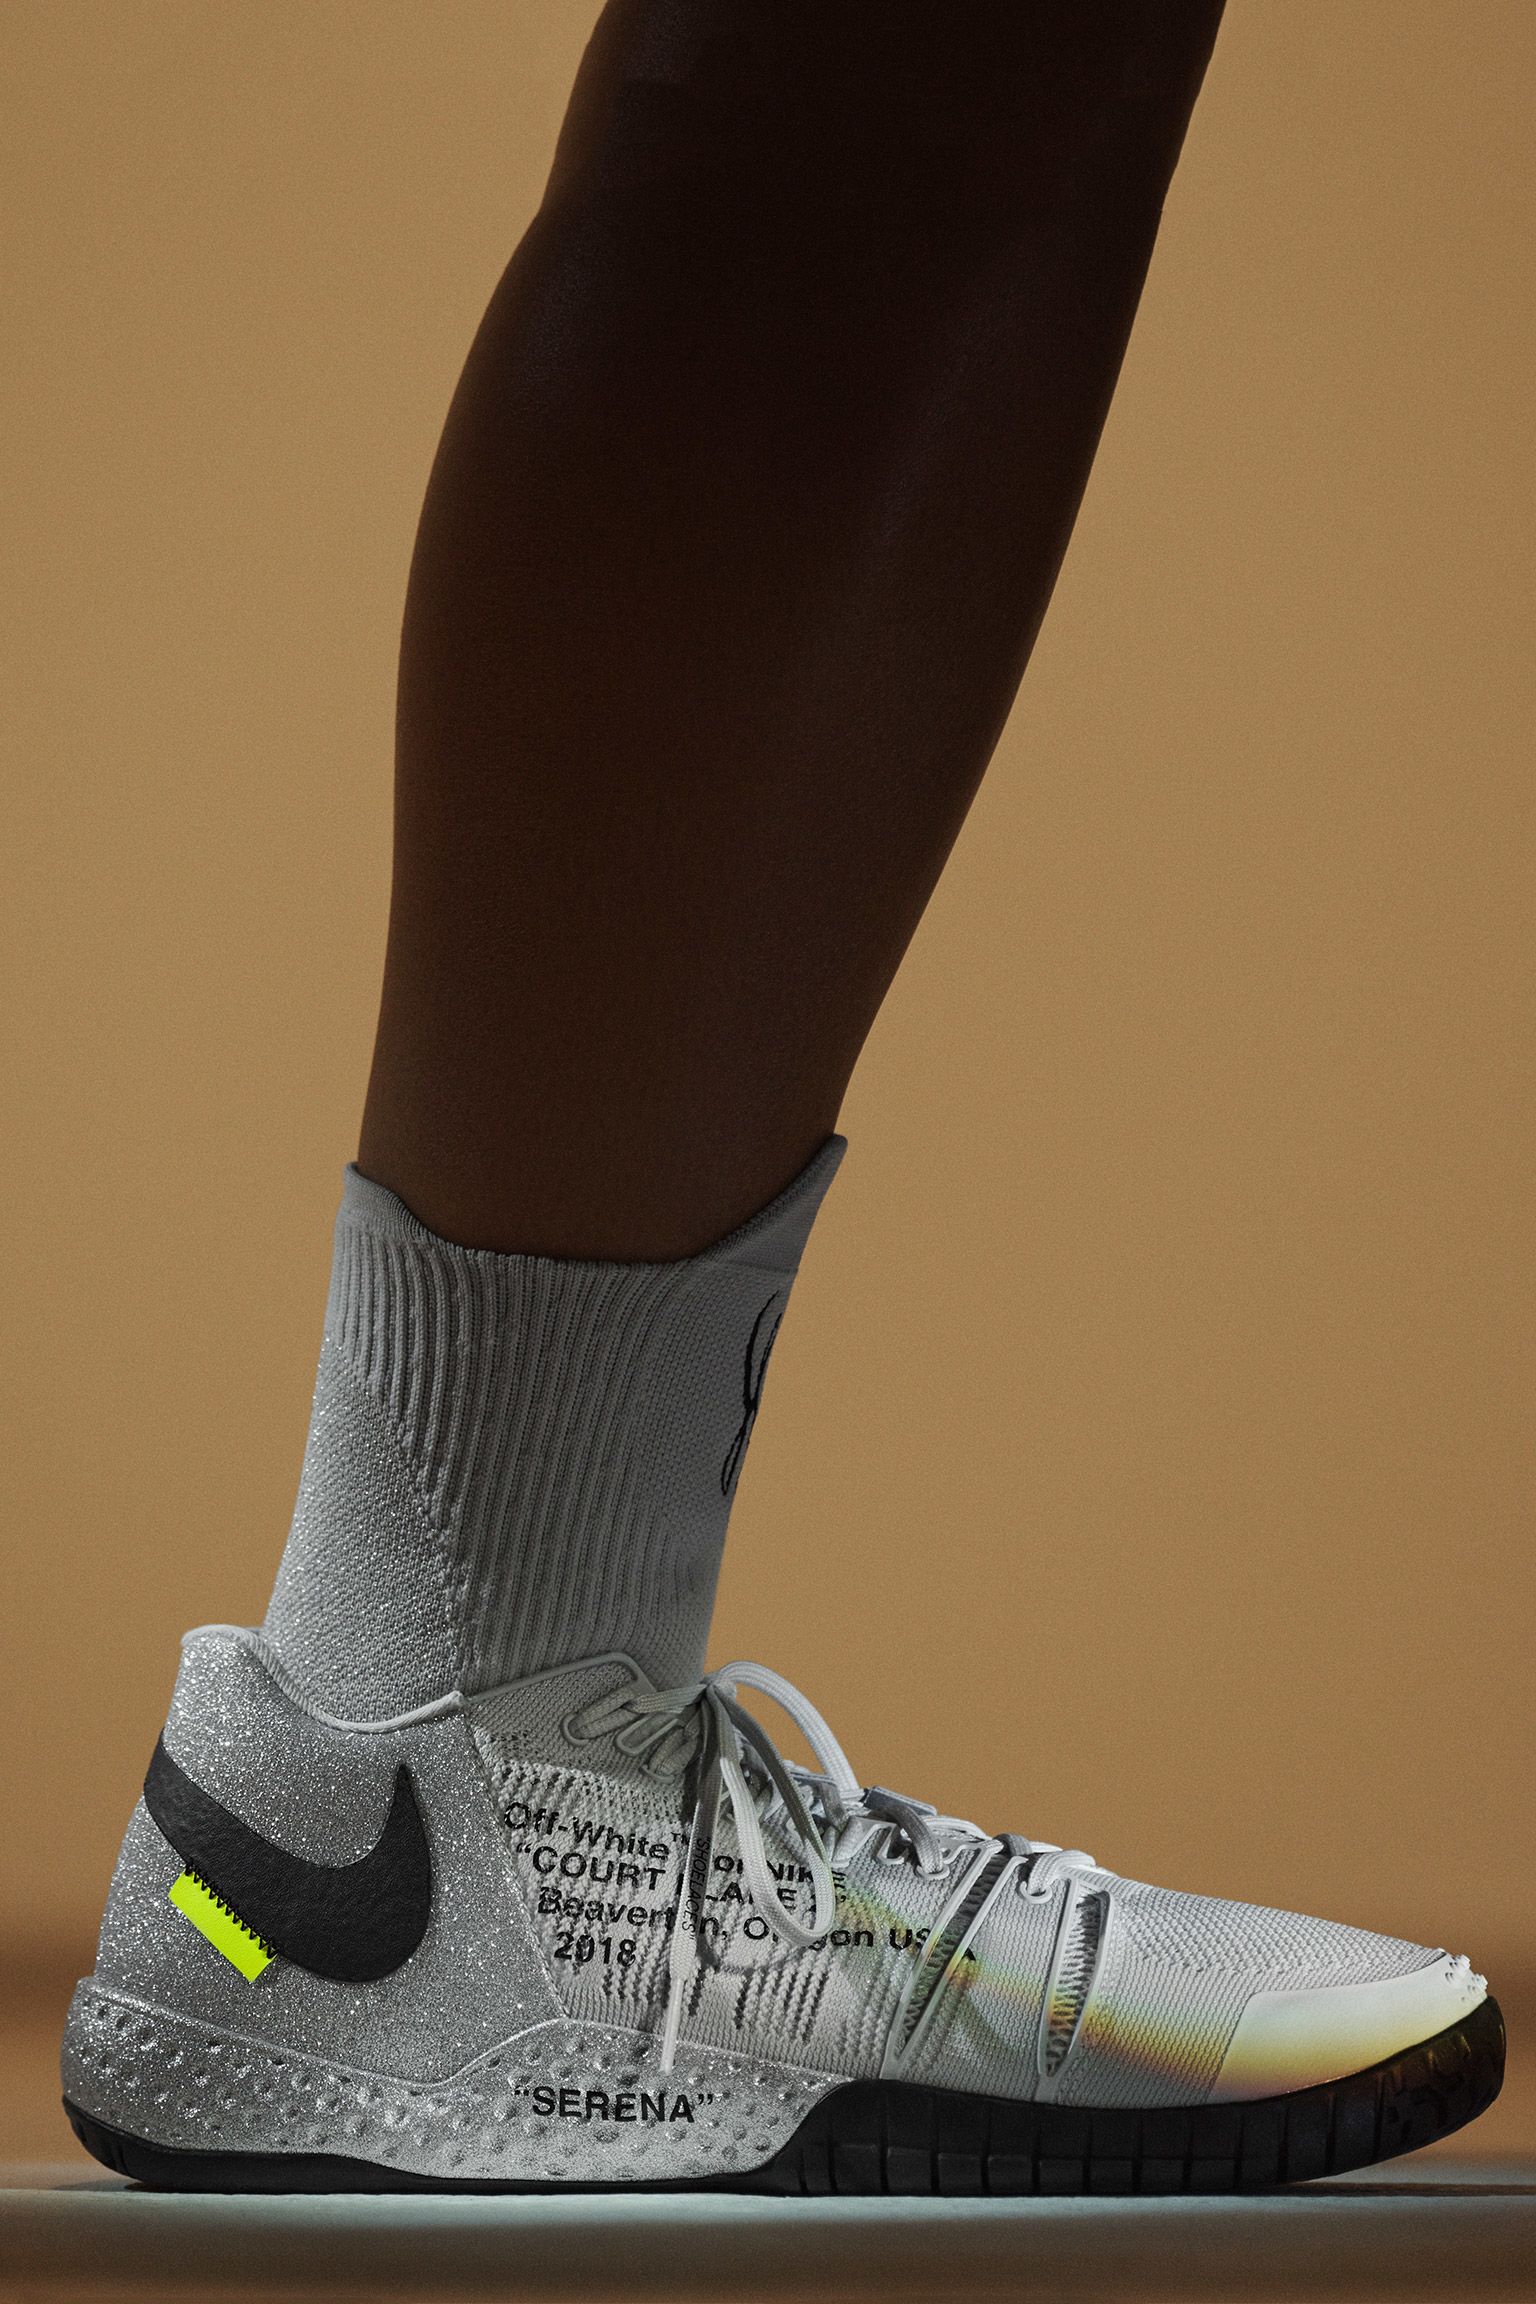 Nike x Virgil for Serena Williams: "Queen" Colelction. Nike SNKRS